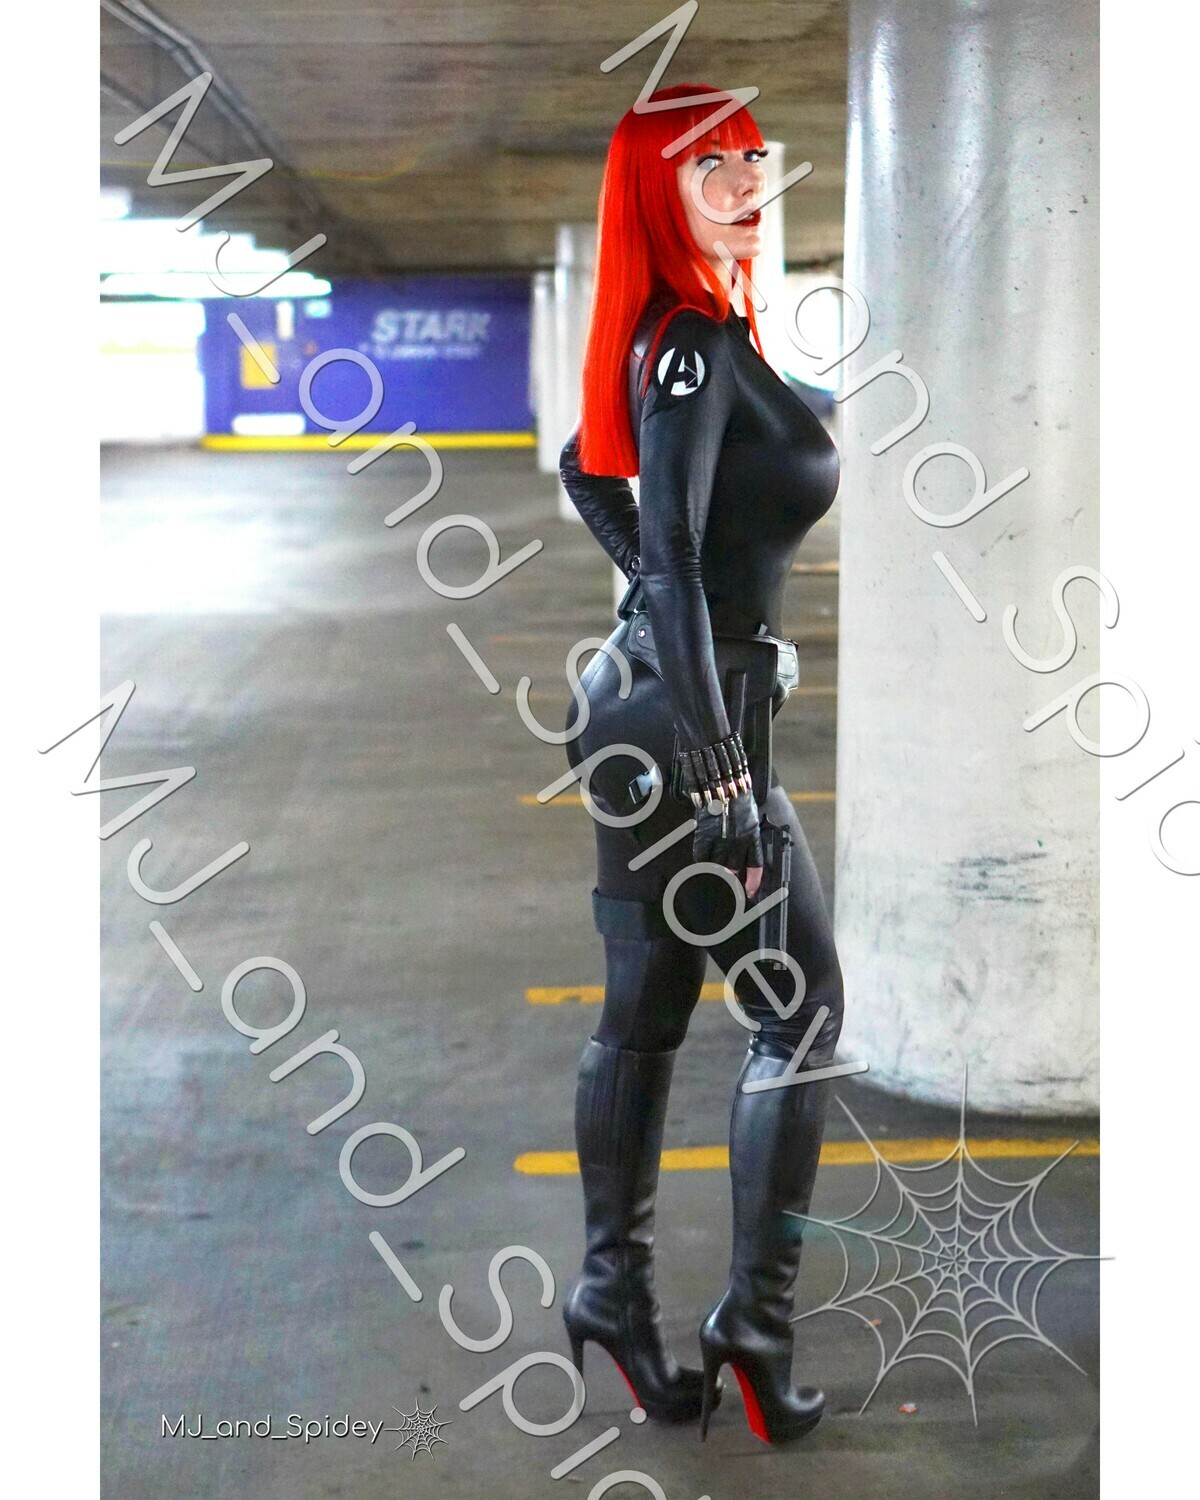 Marvel - Avengers - Black Widow No. 4 - Digital Cosplay Image (@MJ_and_Spidey, MJ and Spidey, Comics)